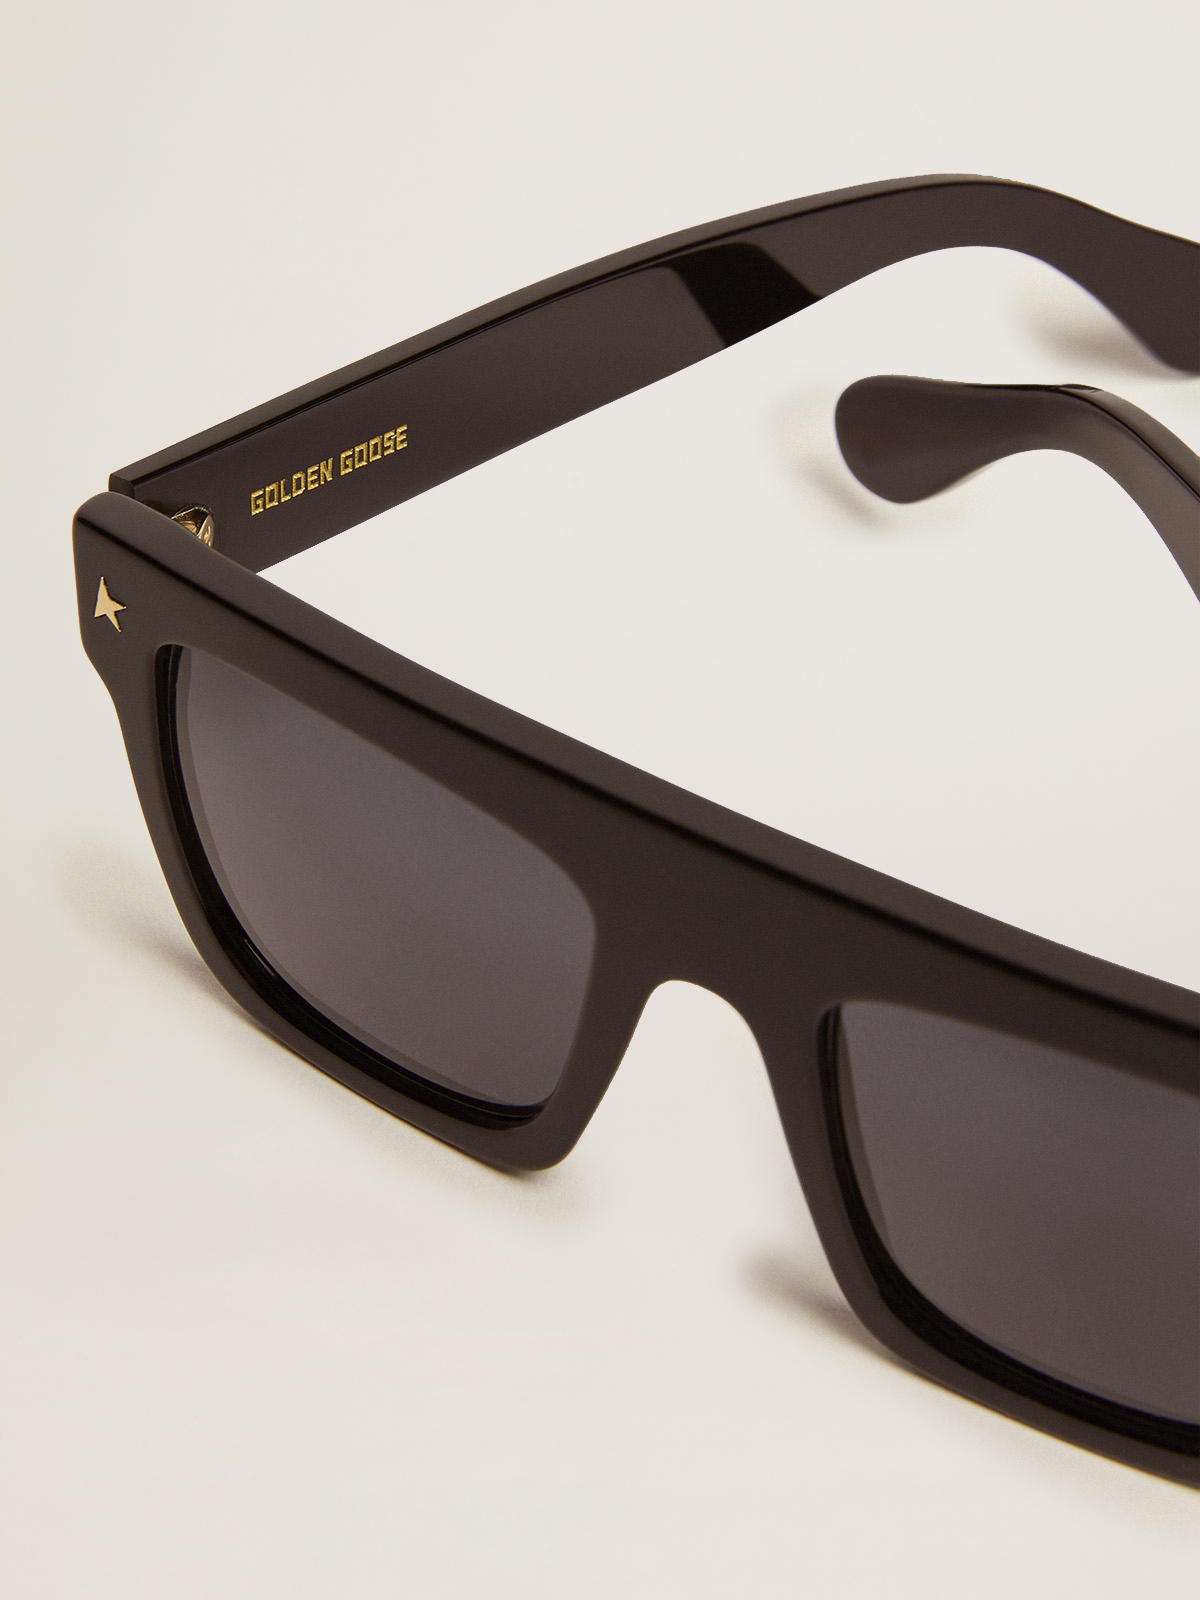 Square sunglasses with black frame and gold details